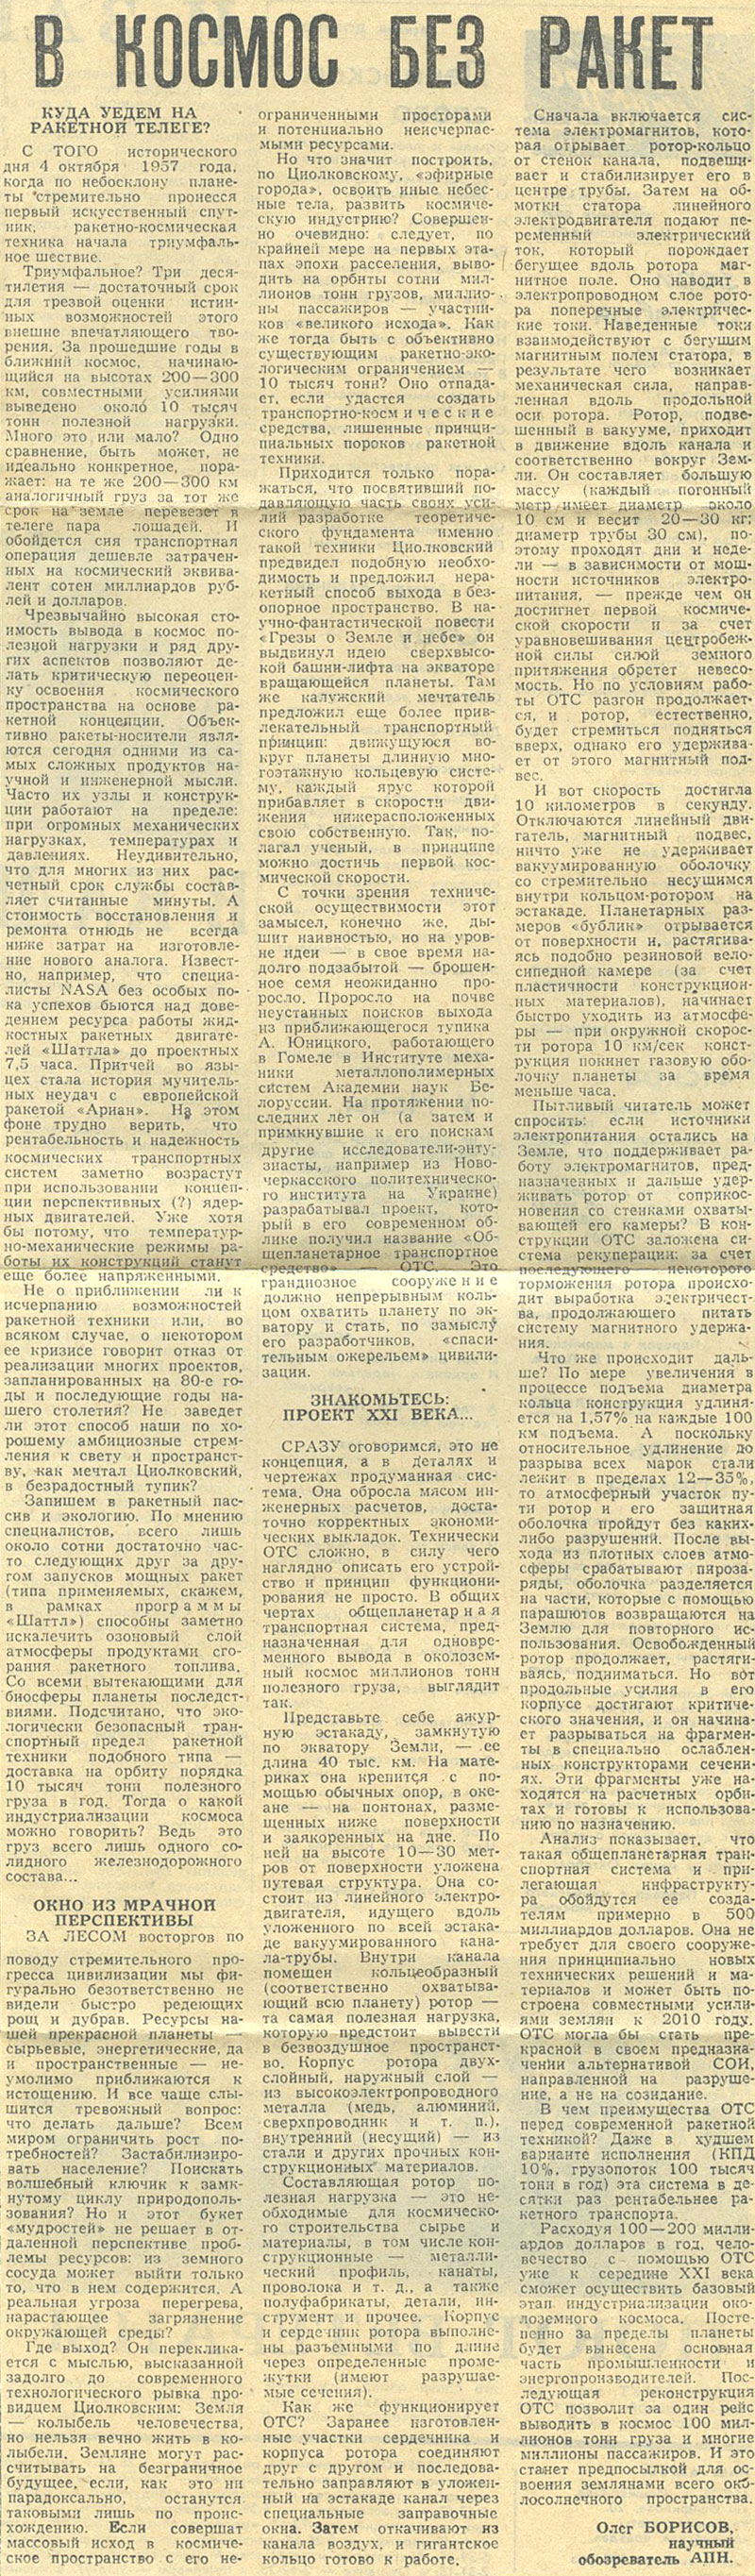 The newspaper Mariyskaya pravda issued in Yoshkar-Ola published on November 5, 1987 an article Into space without rockets about Anatoly Yunitskiy's project of the General Planetary Vehicle (GPV)